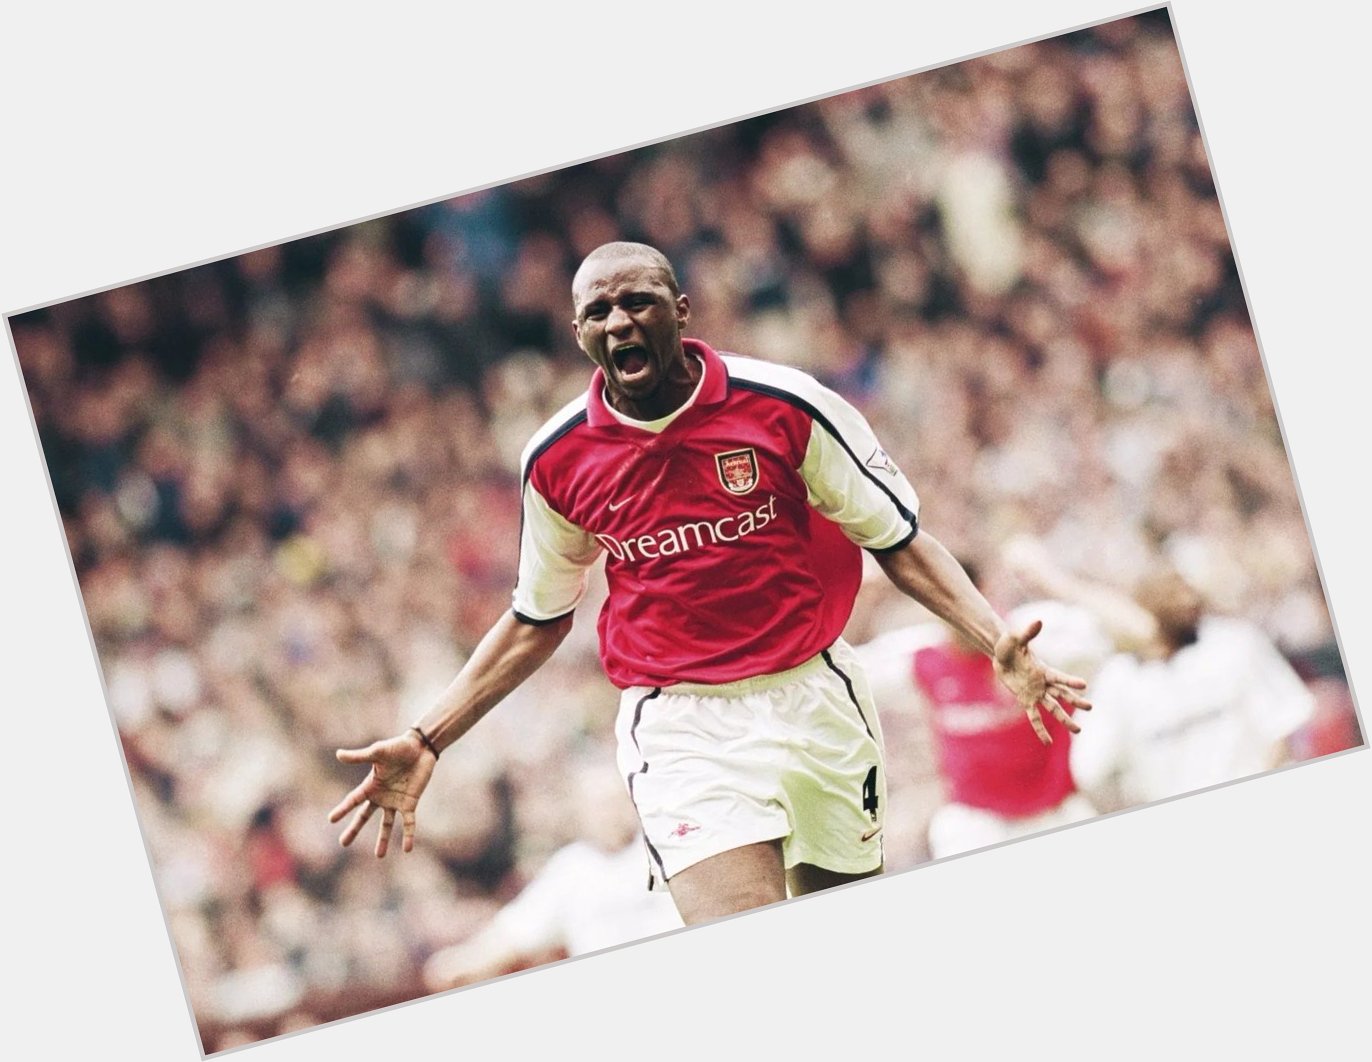 Happy birthday to Patrick Vieira, the two most important midfielders in Arsenal history! 